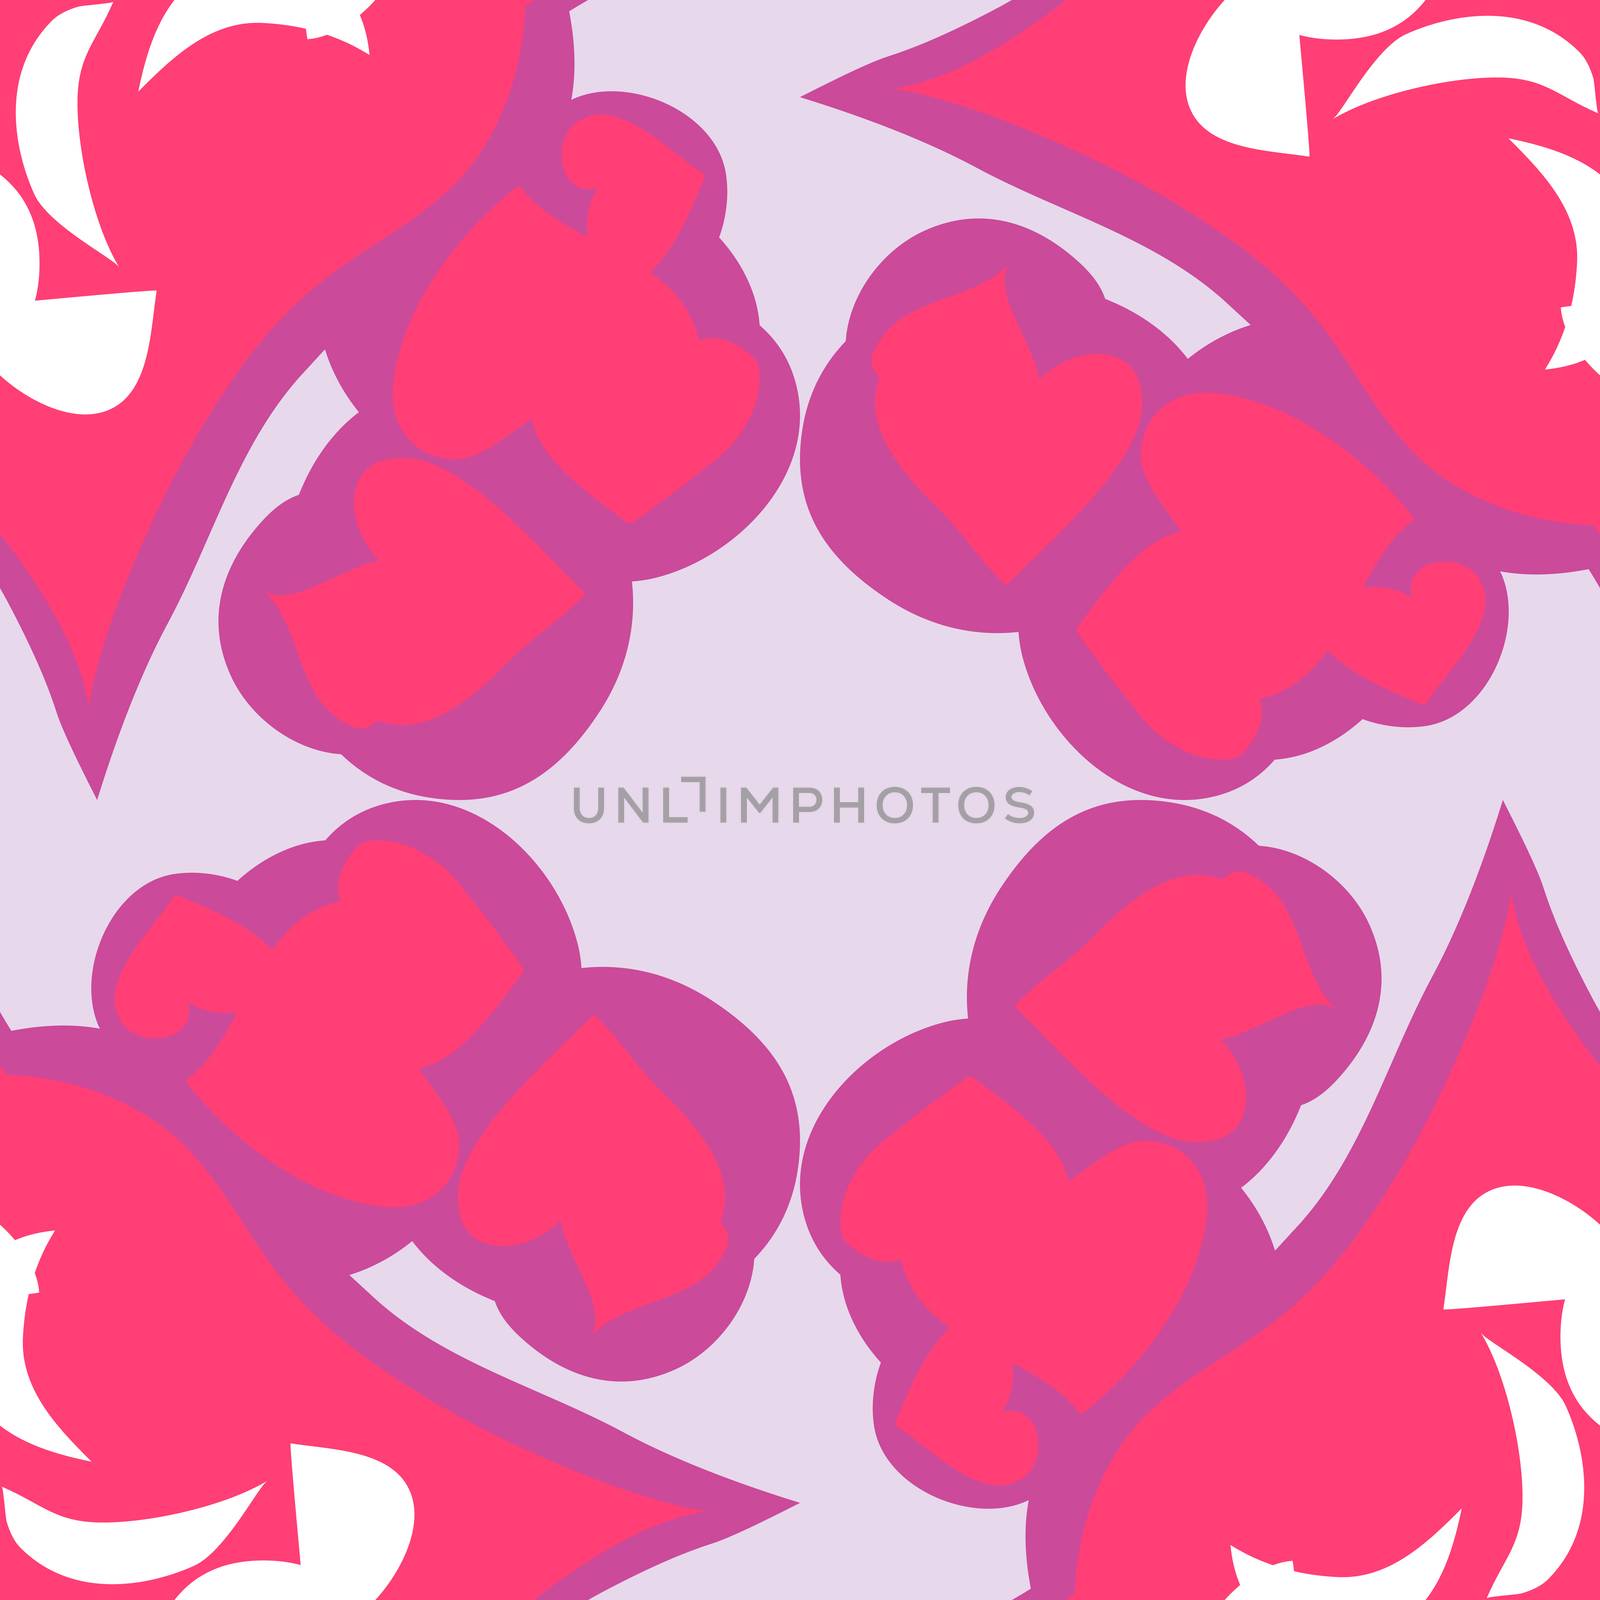 Tiled pattern of seamless pink and purple shapes